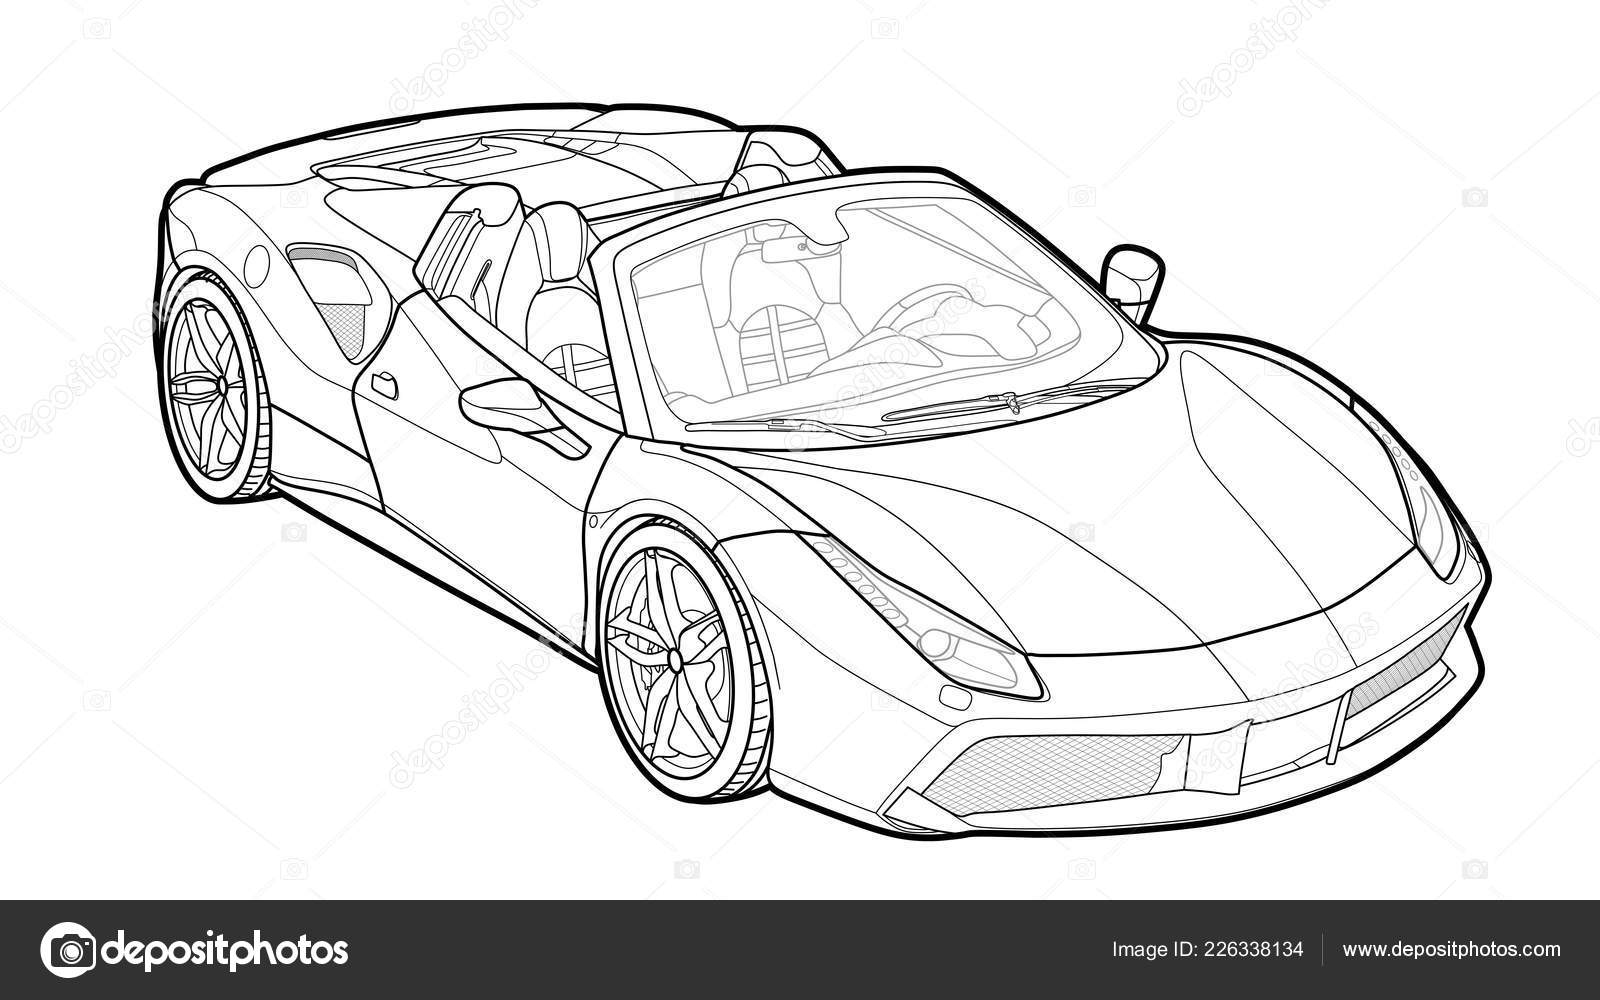 Drawing of a luxury sports car from front view Vector Image